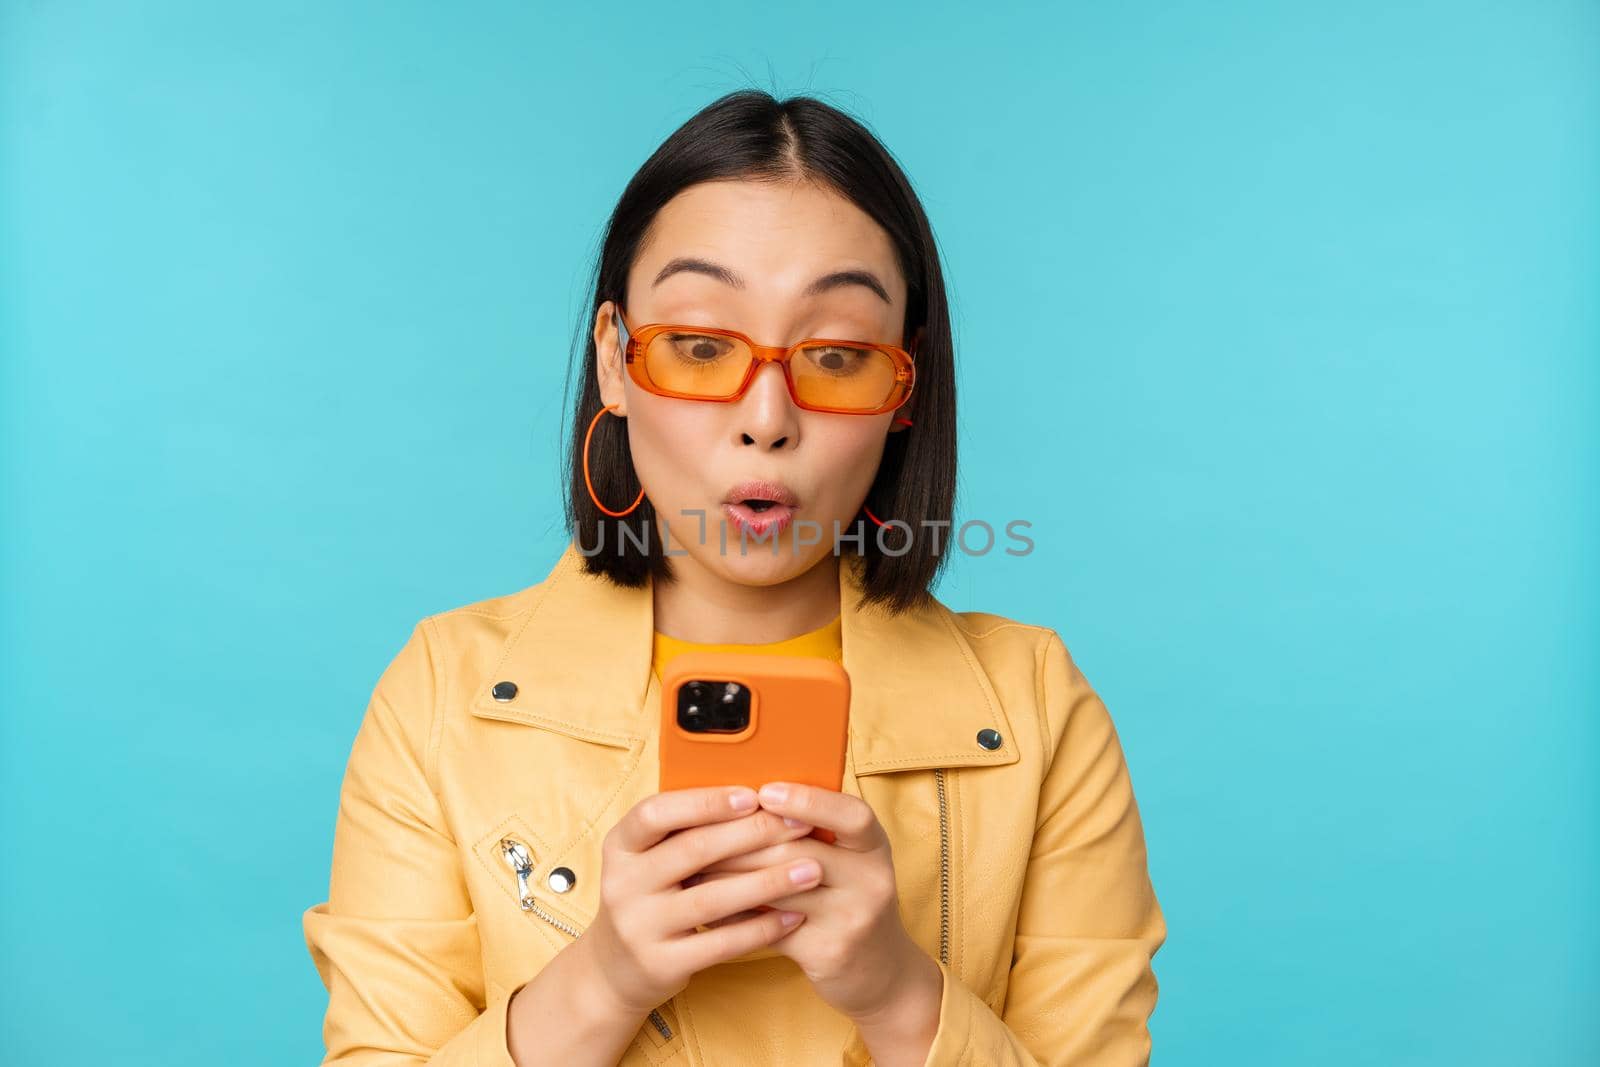 Portrait of asian woman in sunglasses, looking at mobile phone with surprised face expression, standing over blue background. Copy space